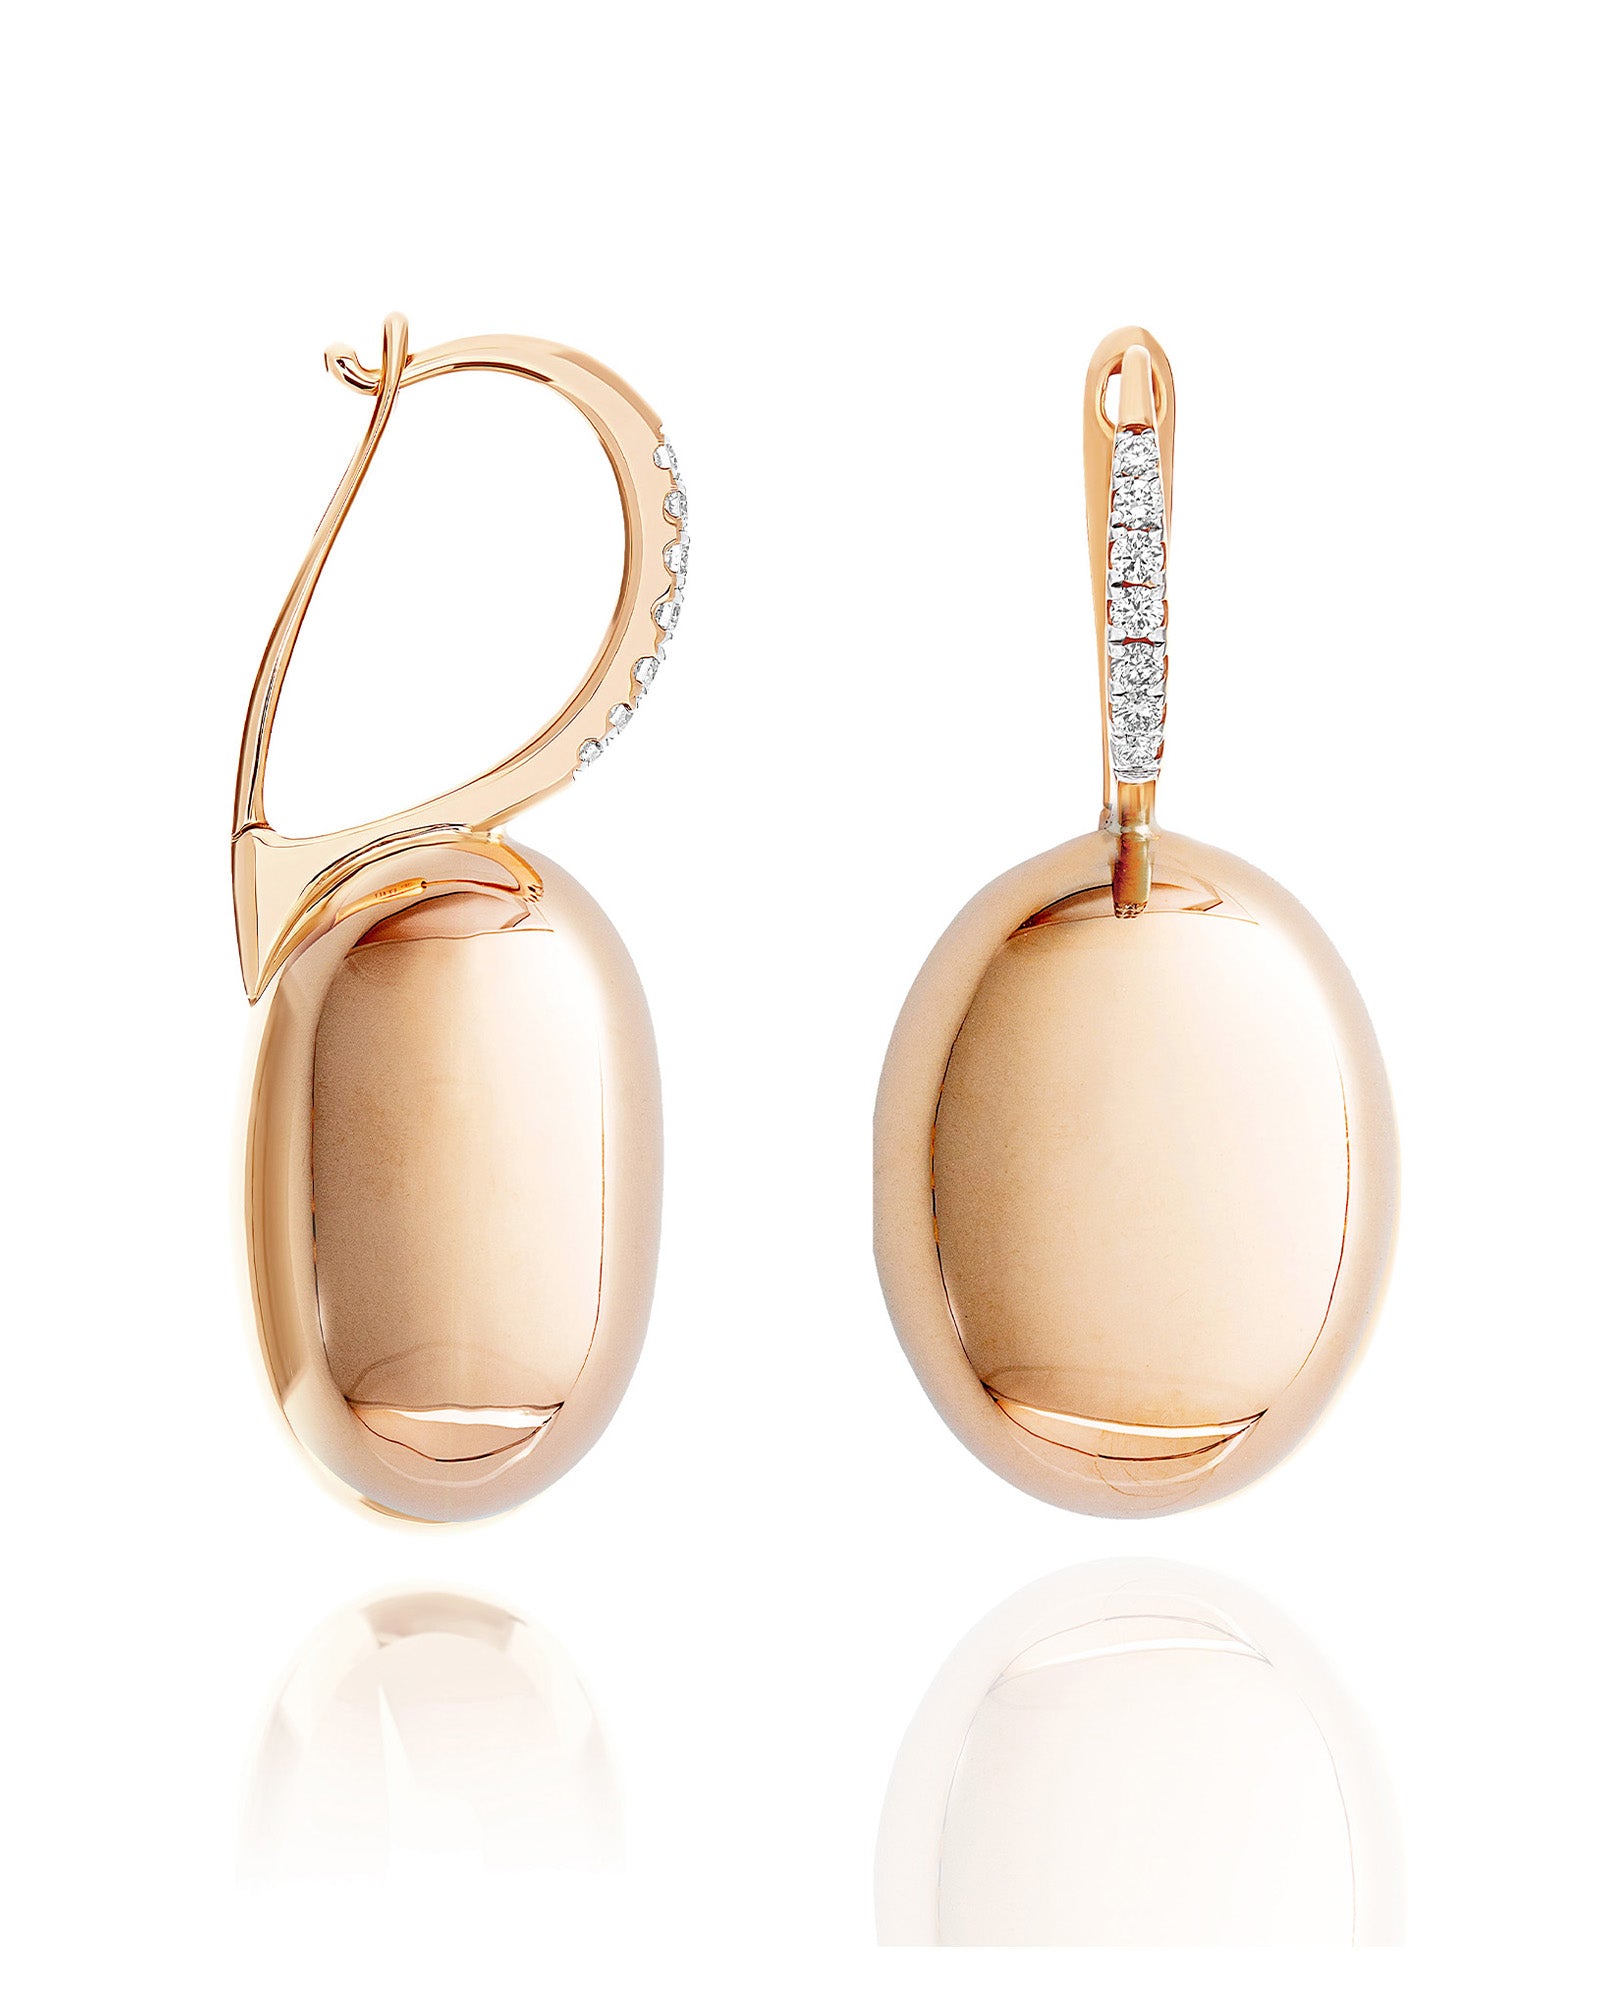 "Ciliegine" rose gold boules and diamonds details earrings (large)